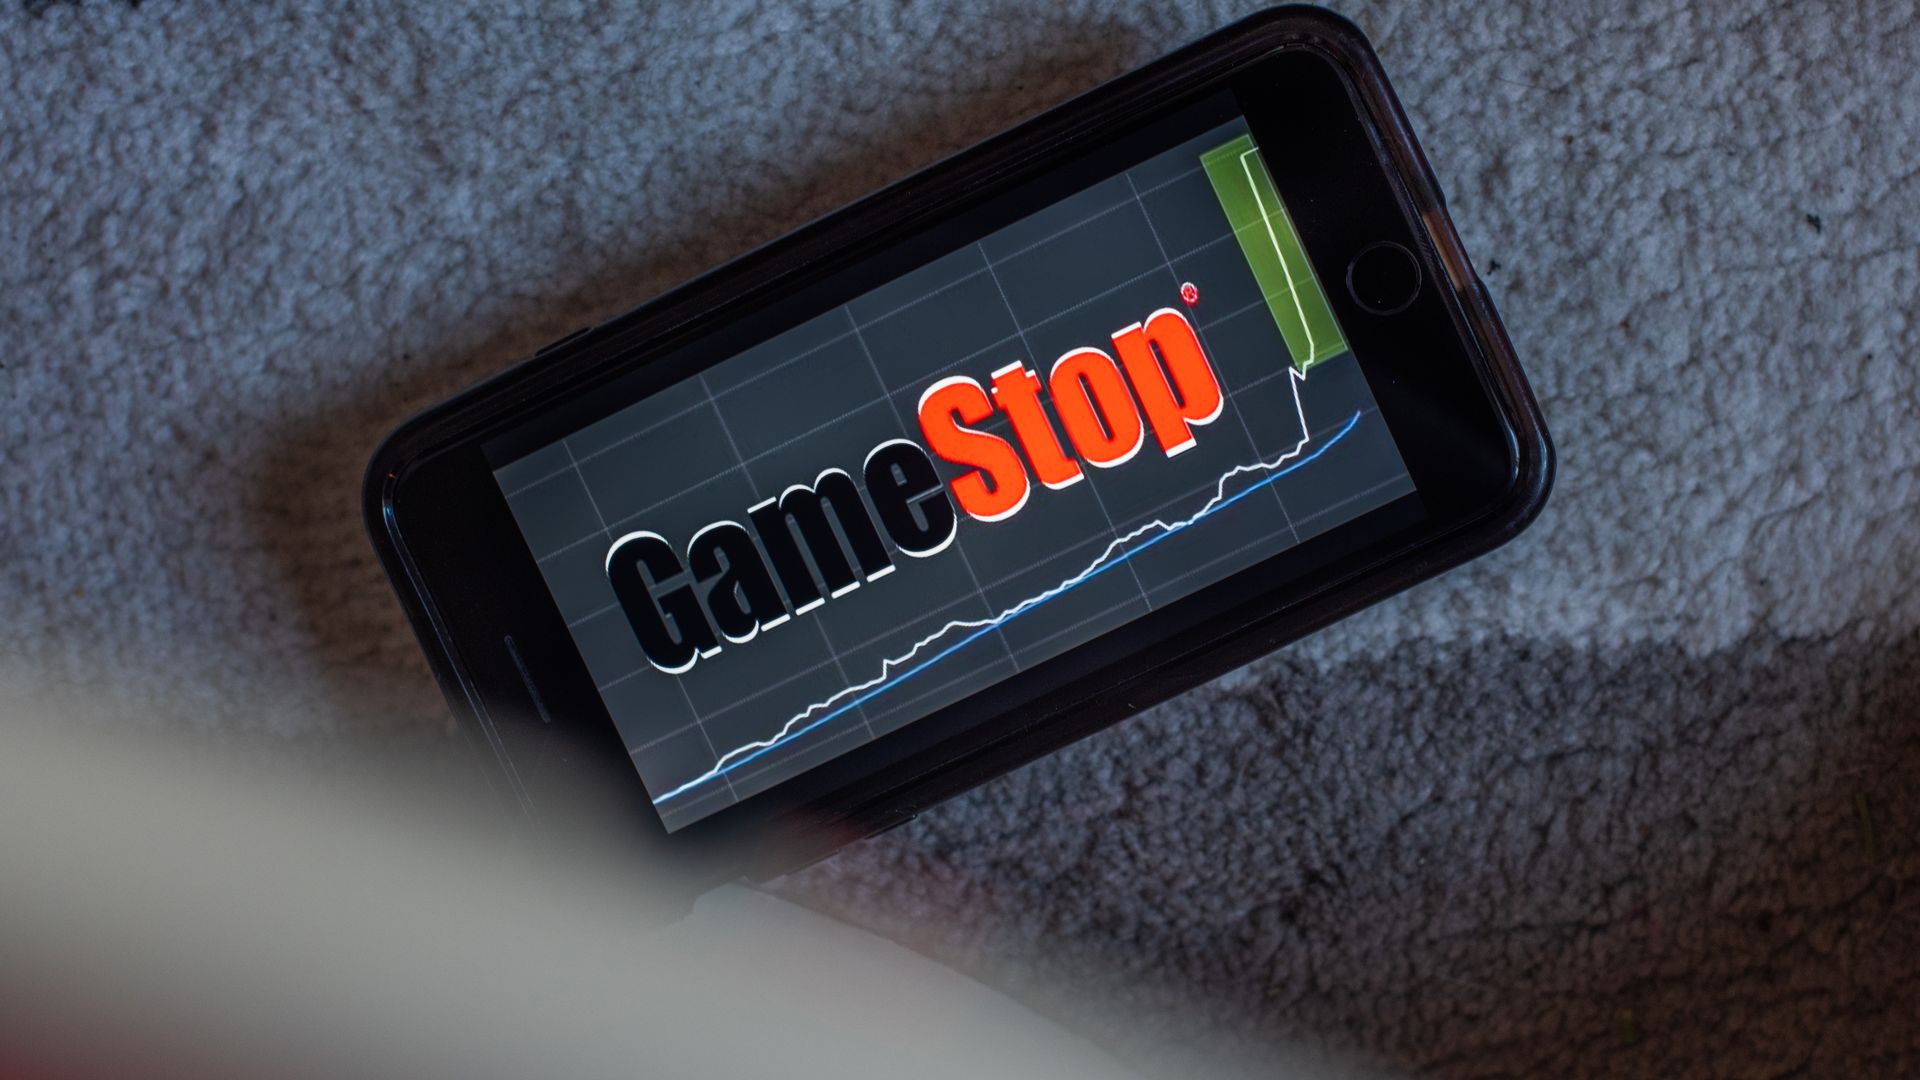 Photo of a phone that has the GameStop logo on it